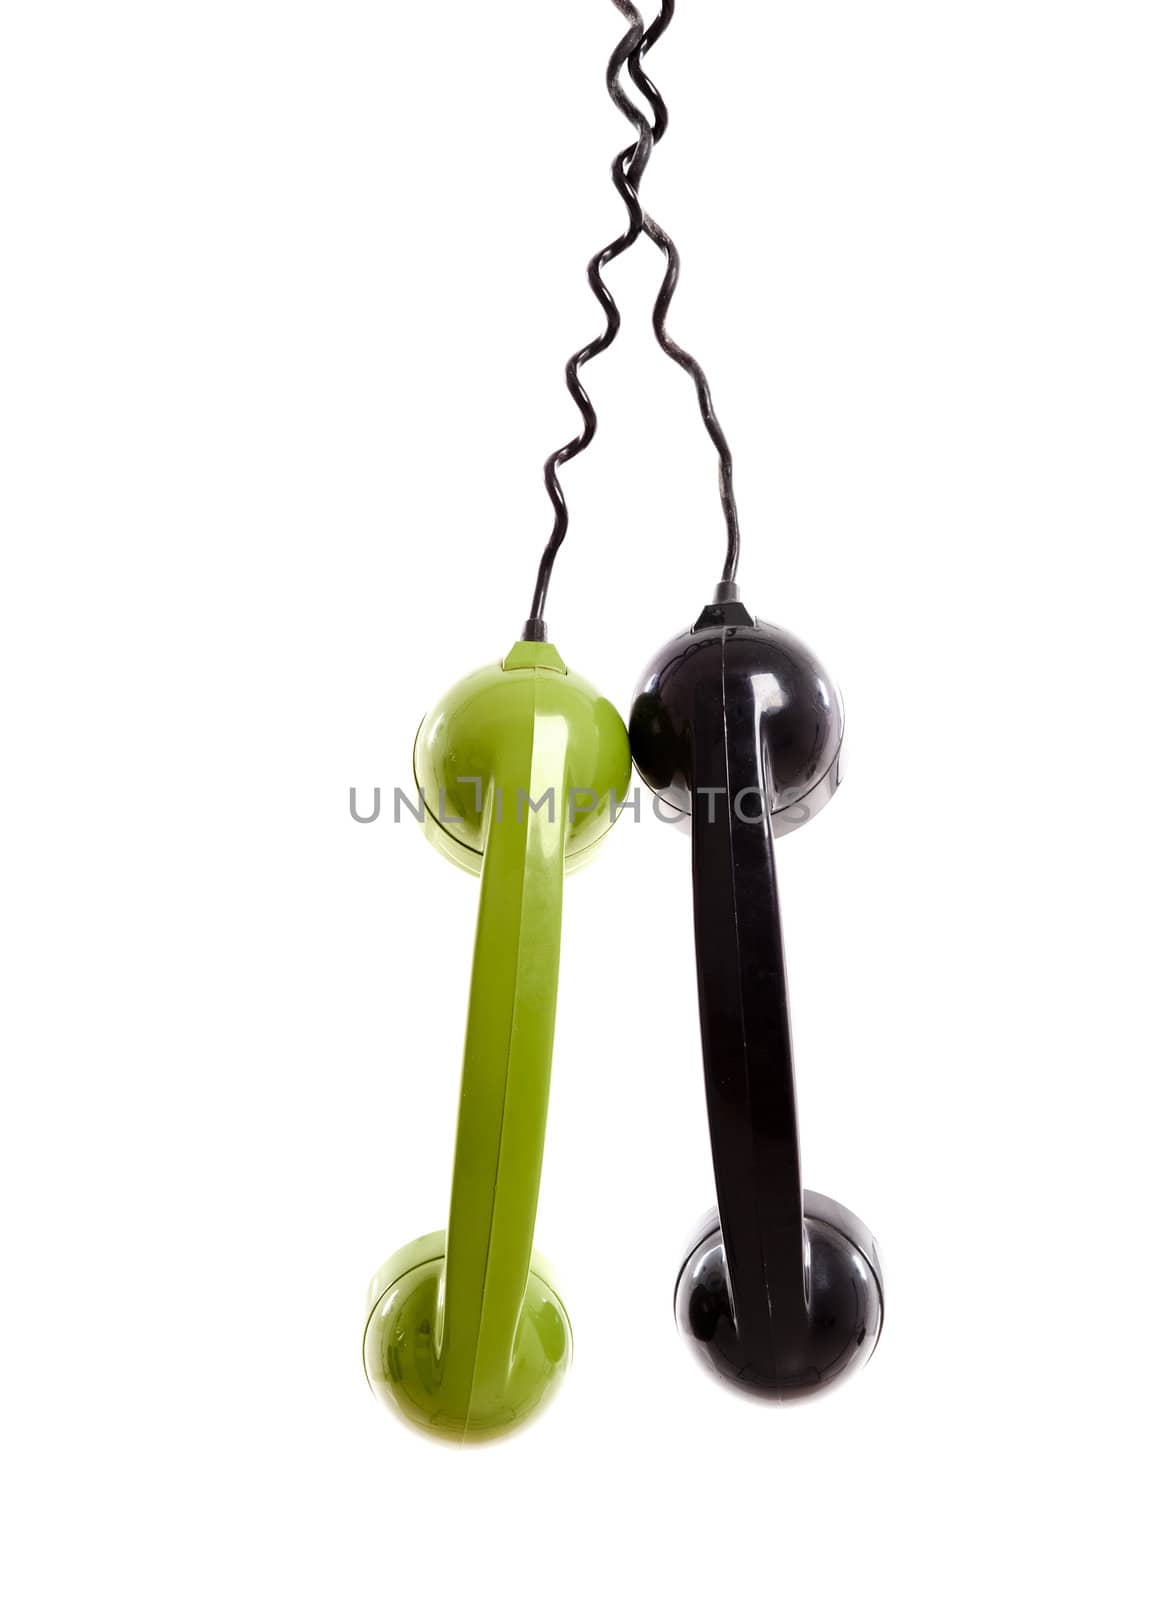 Two Handset piece from old phones suspended by the phone cord, isolated on white background